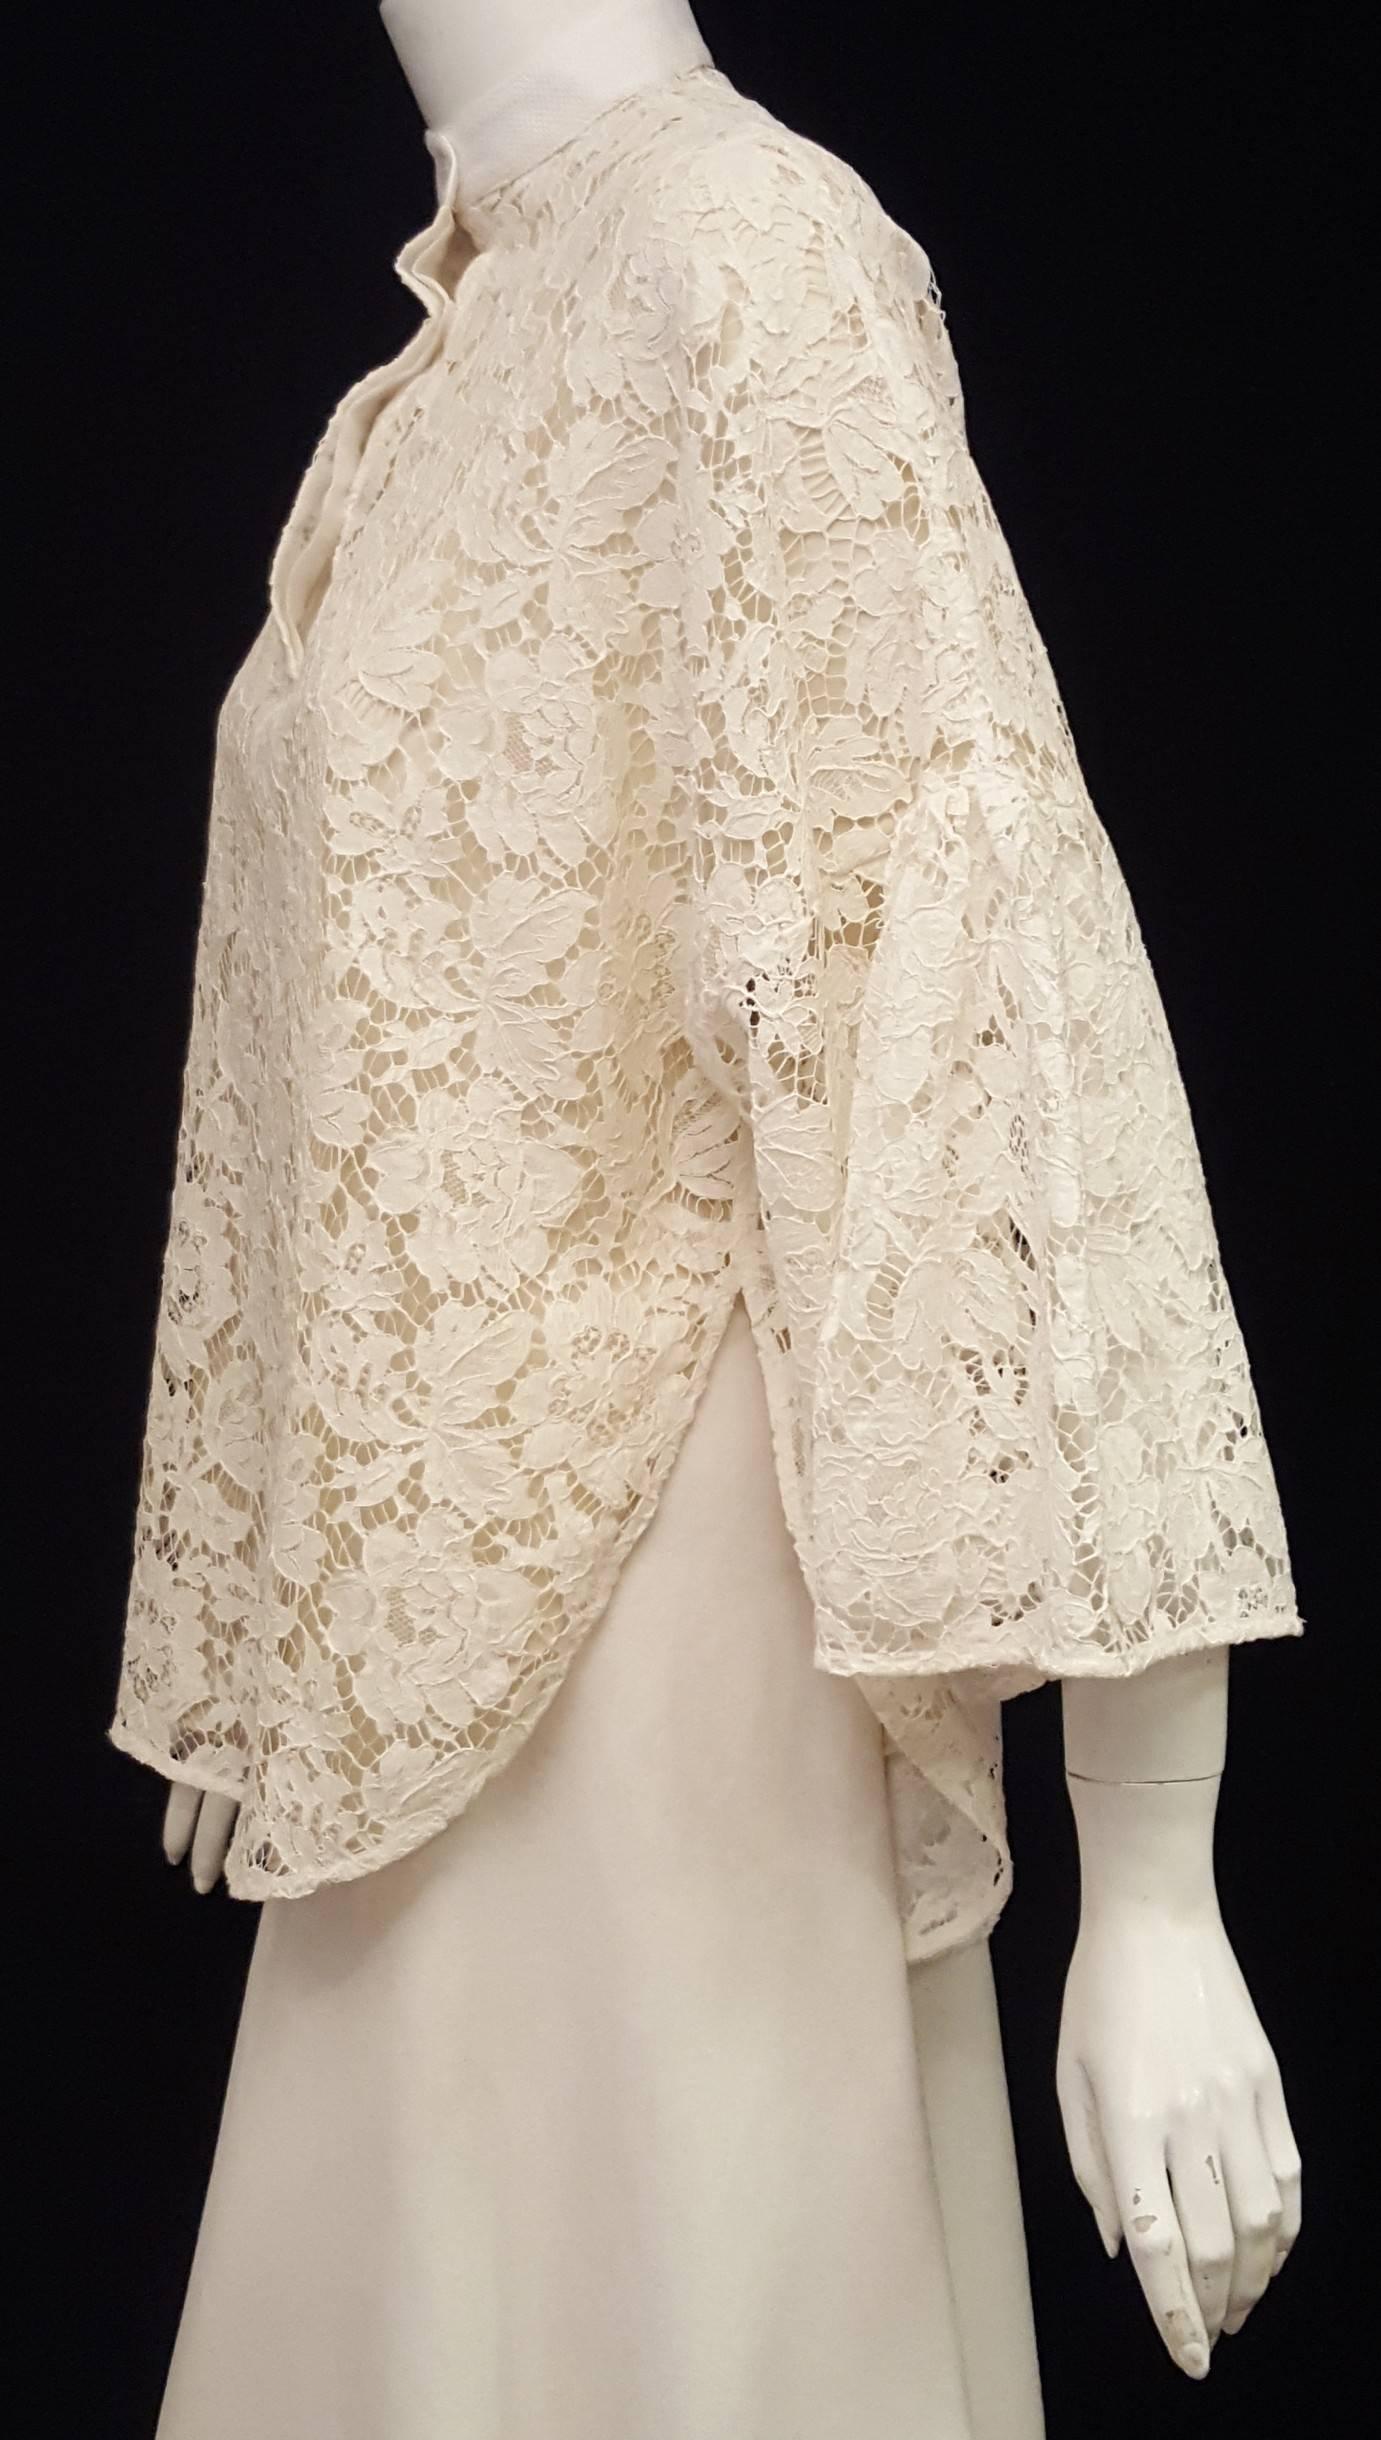 Ivory lace top with mandarin collar and and 3 button front closure is all Valentino Garavani!  Features 3/4 length bell sleeve that is gathered at the elbow, relaxed dolman silhouette, rounded hem and side slits.  This blouse can be worn with a